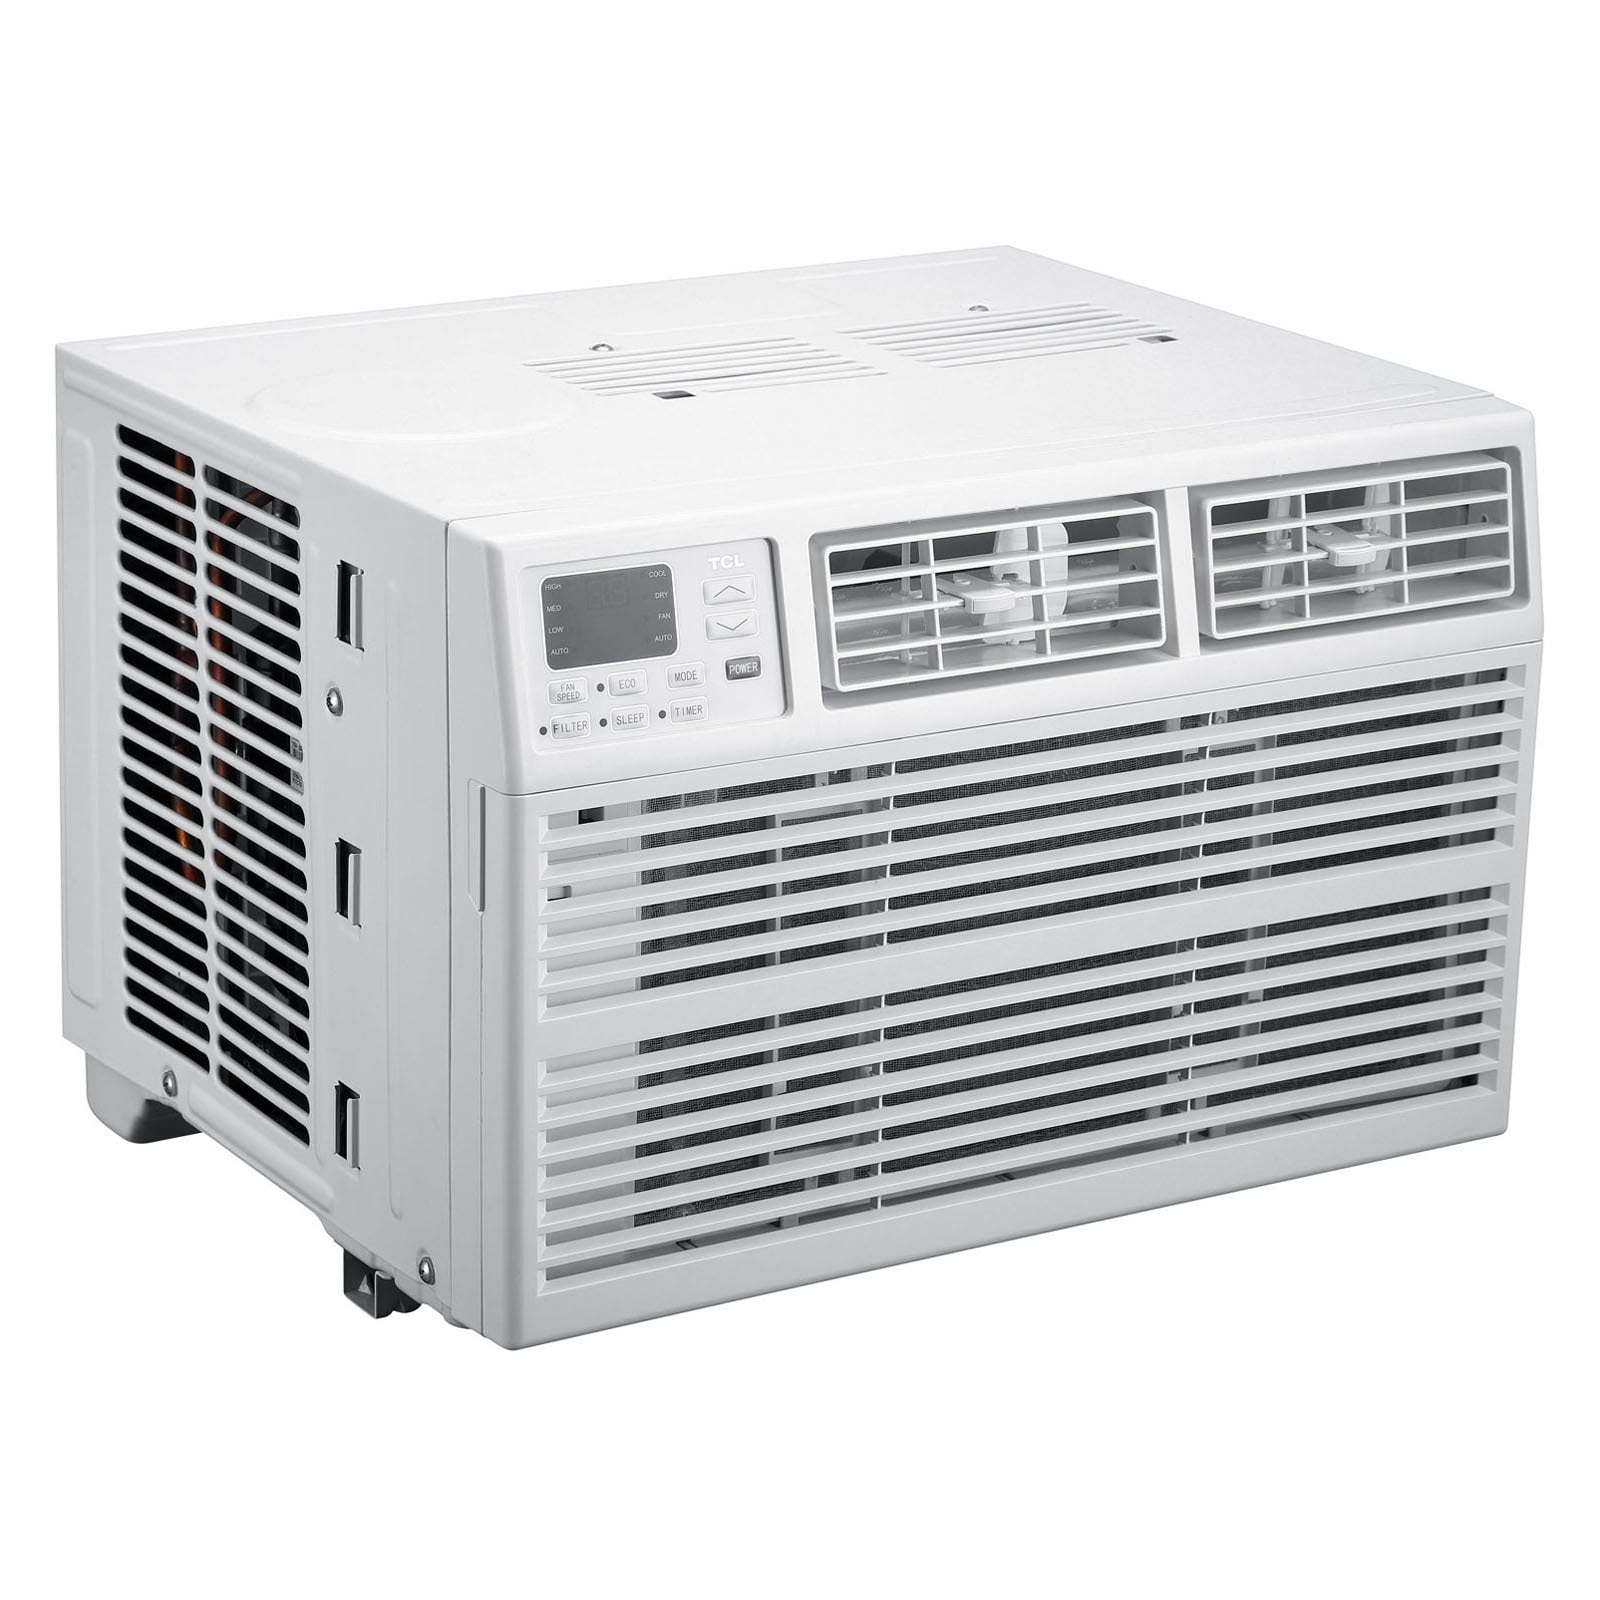 duke-energy-air-conditioner-clients-air-conditioning-also-a-c-air